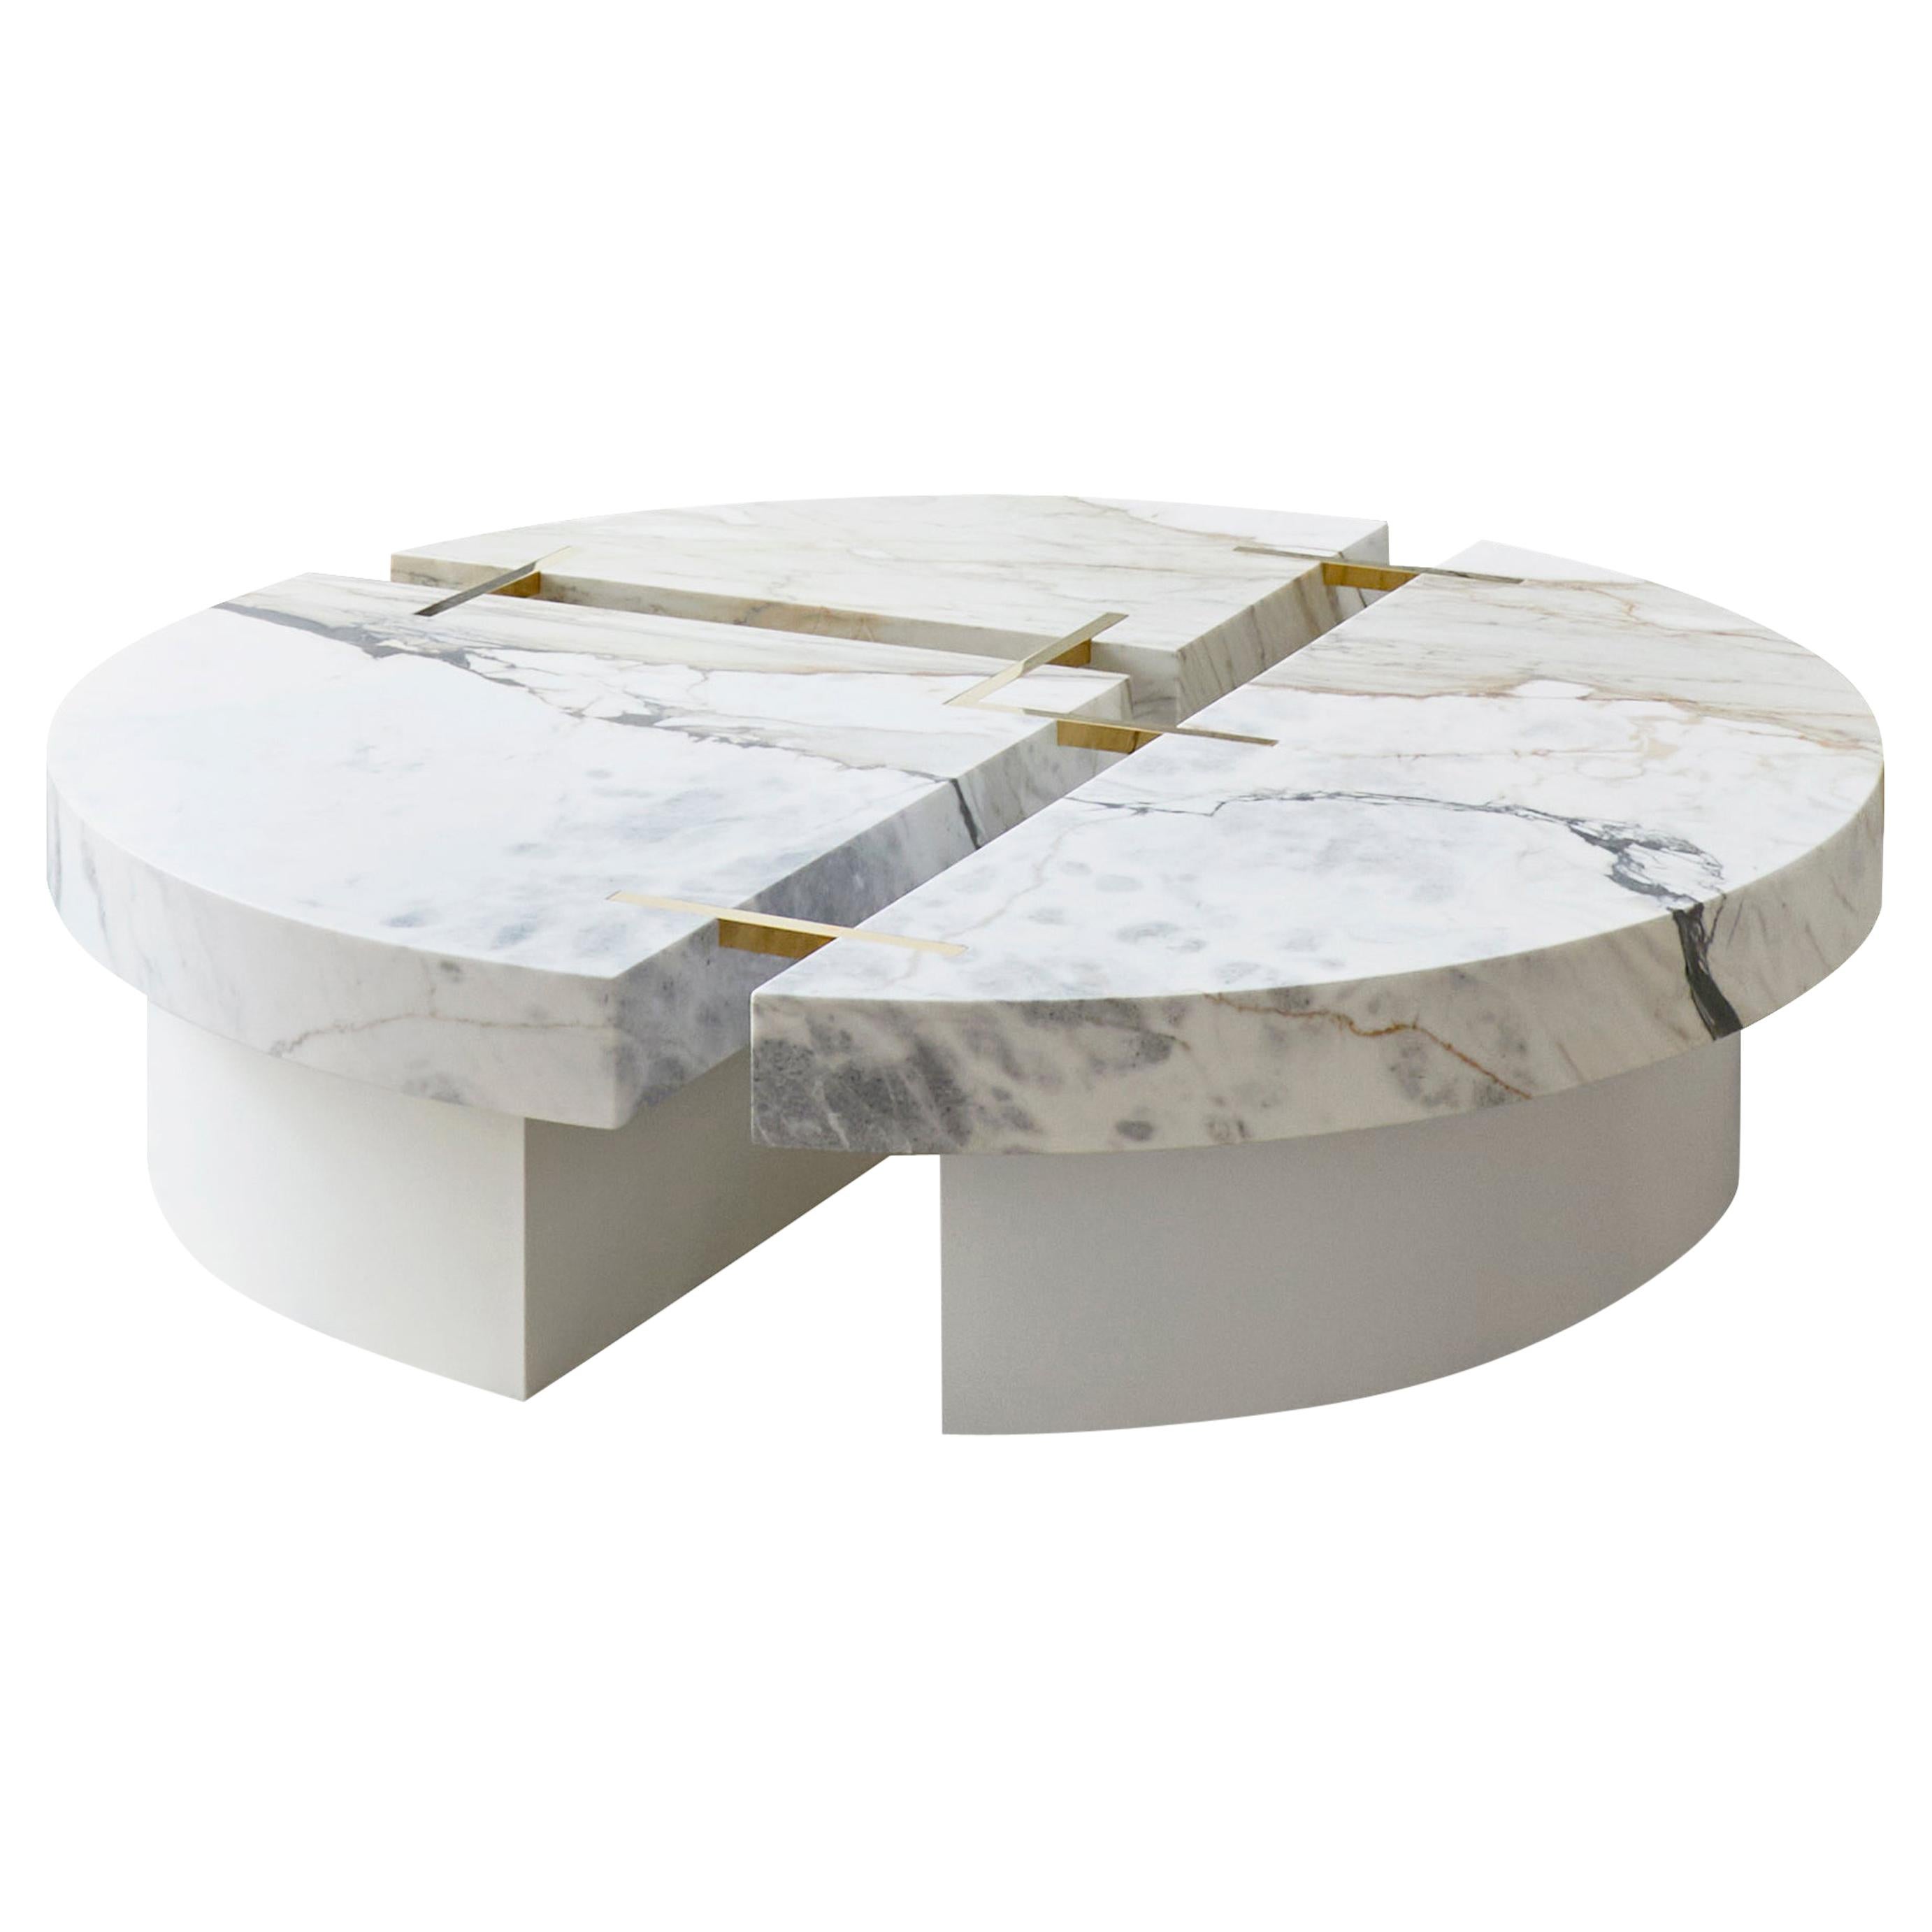 Galerie Negropontes Coffee table Couture by Hervé Langlais 2019 France Marble 